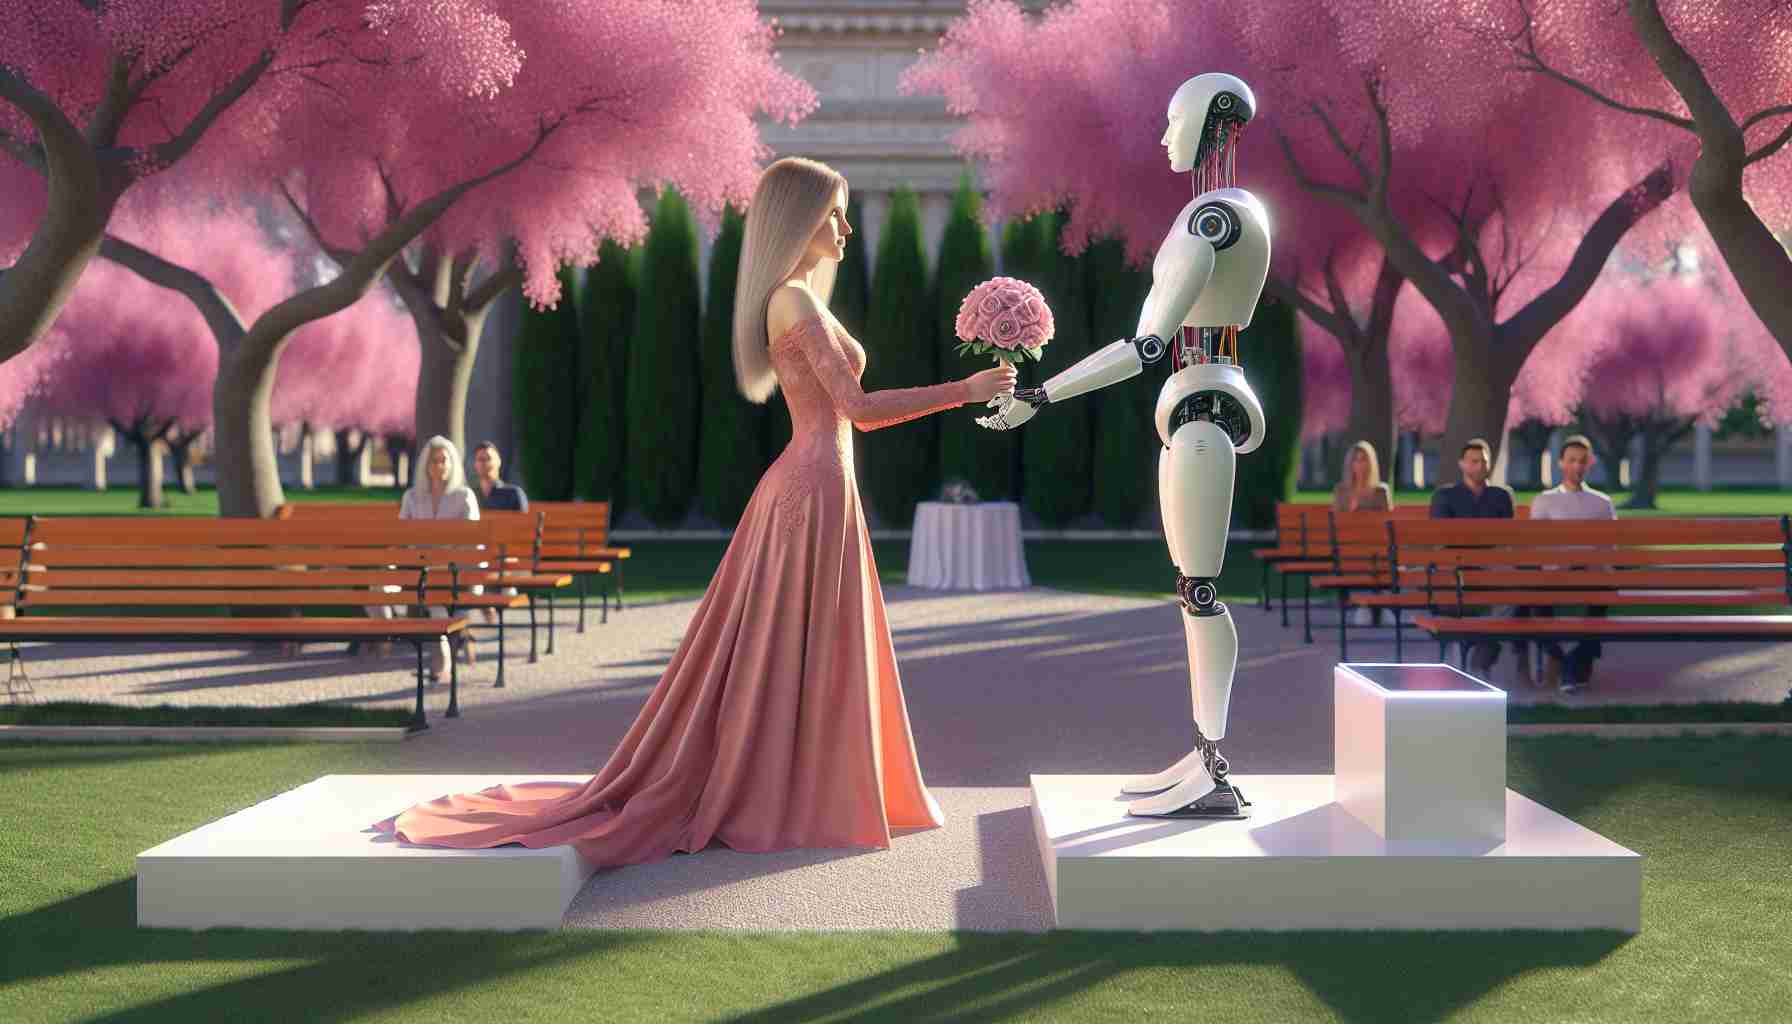 Spanish Artist Plans to Marry Her AI Companion